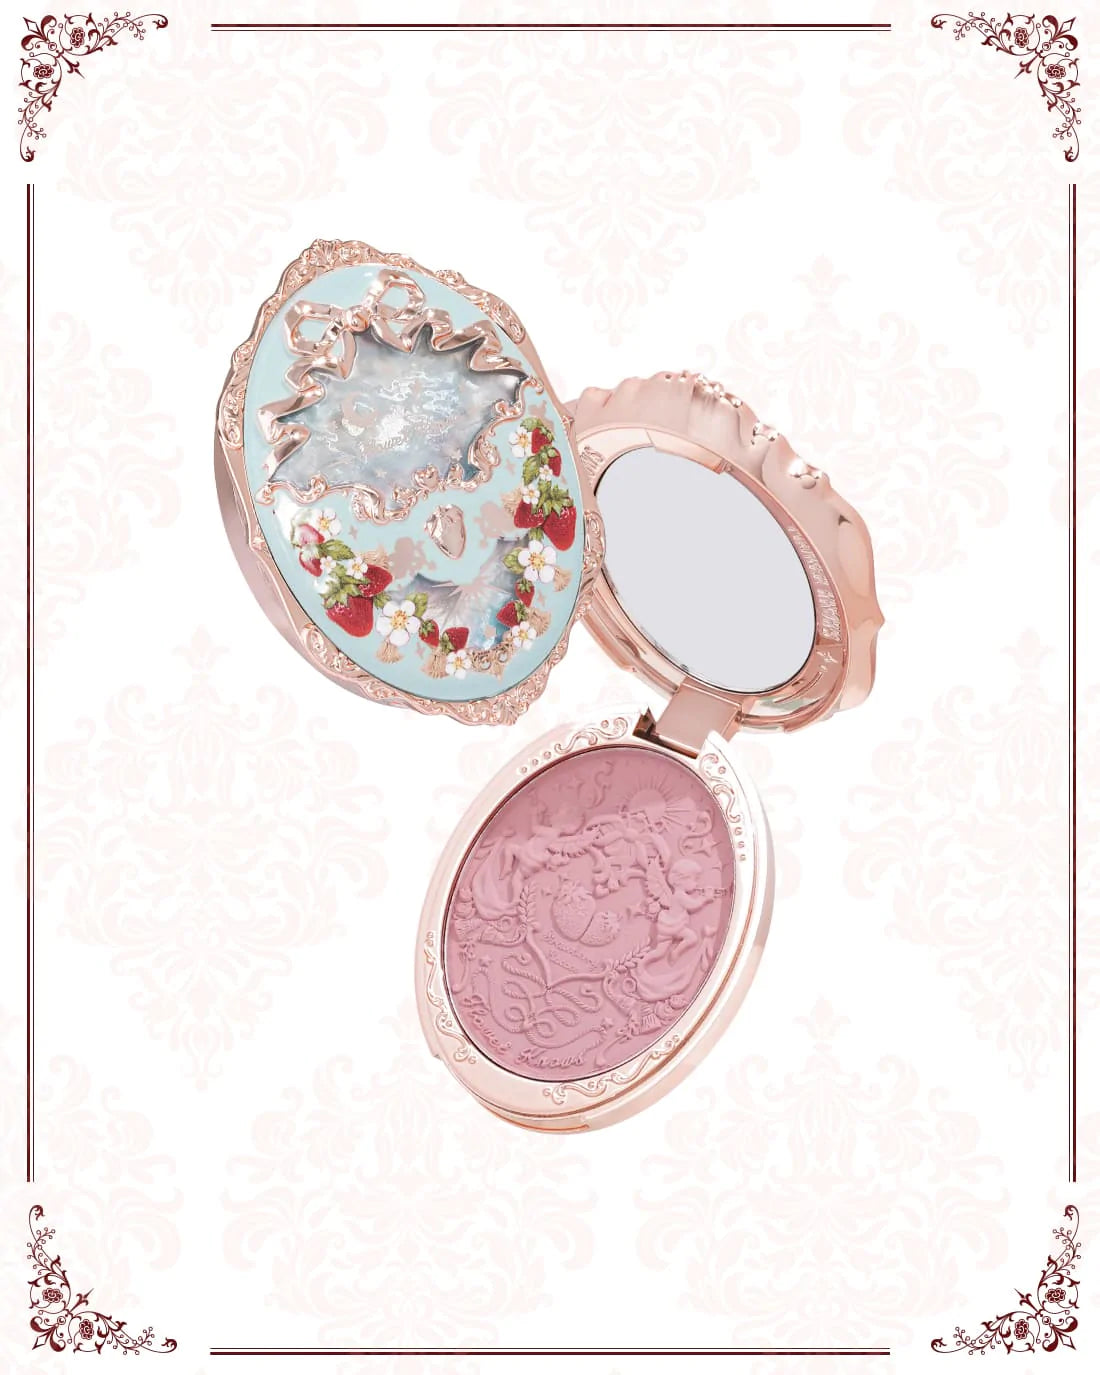 FLOWER KNOWS, STRAWBERRY ROCOCO EMBOSSED BLUSH